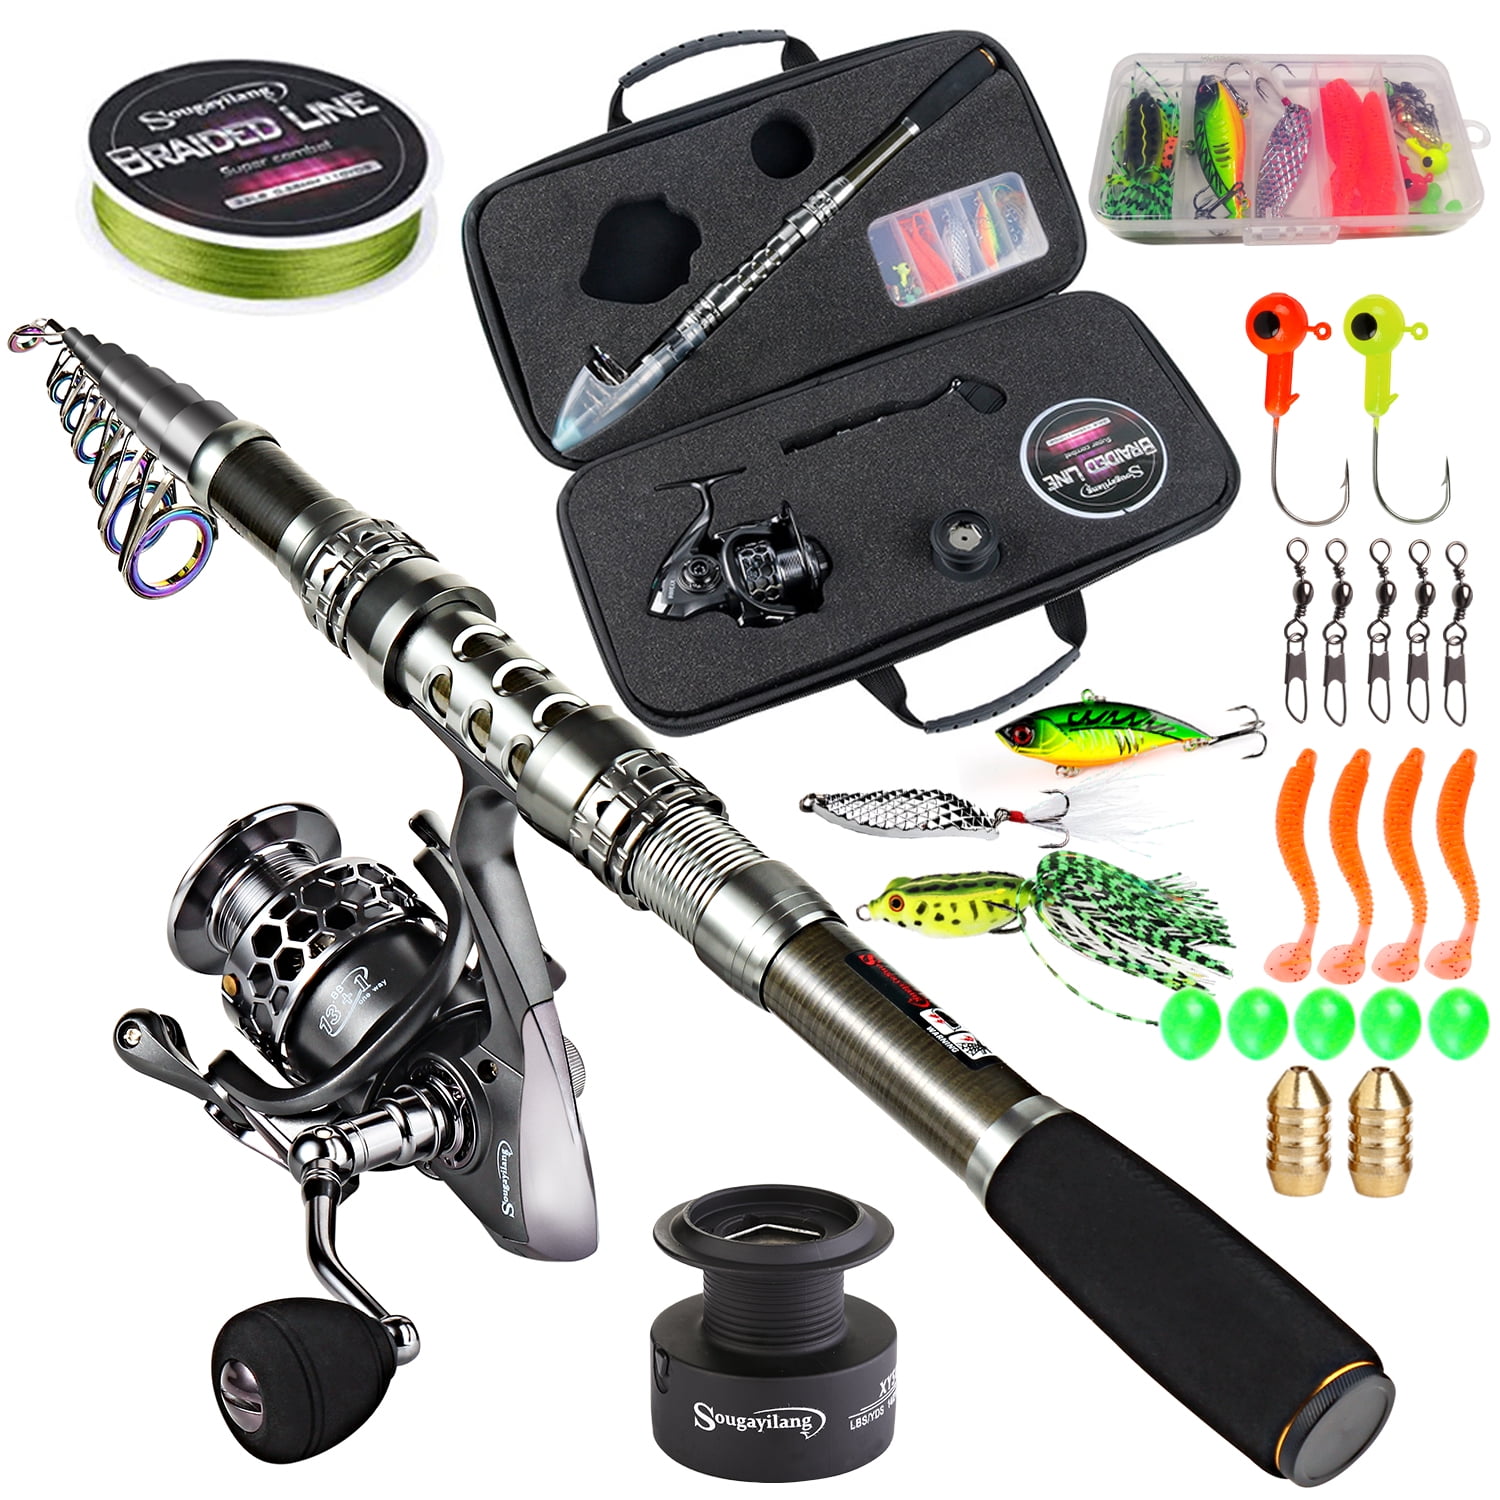 RAD Youth Fishing Rod & Reel Combo-5'2” Fiberglass Pole, Spinning Reel,  Cork Handle & Tackle Kit for Beginners-Kettle Series 